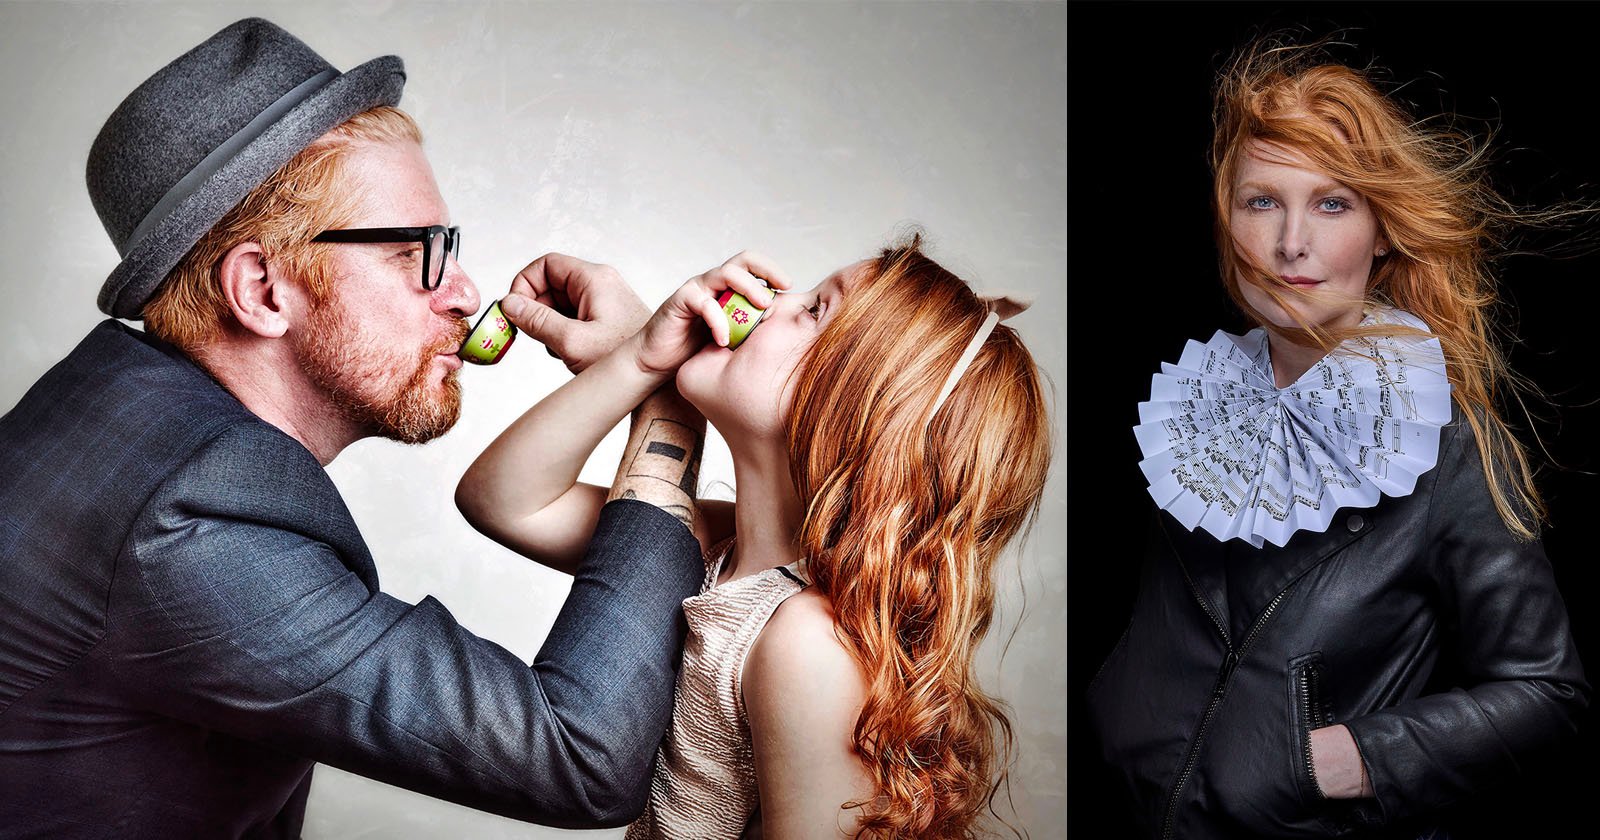  photographer captures over 500 redheads 11-year project 